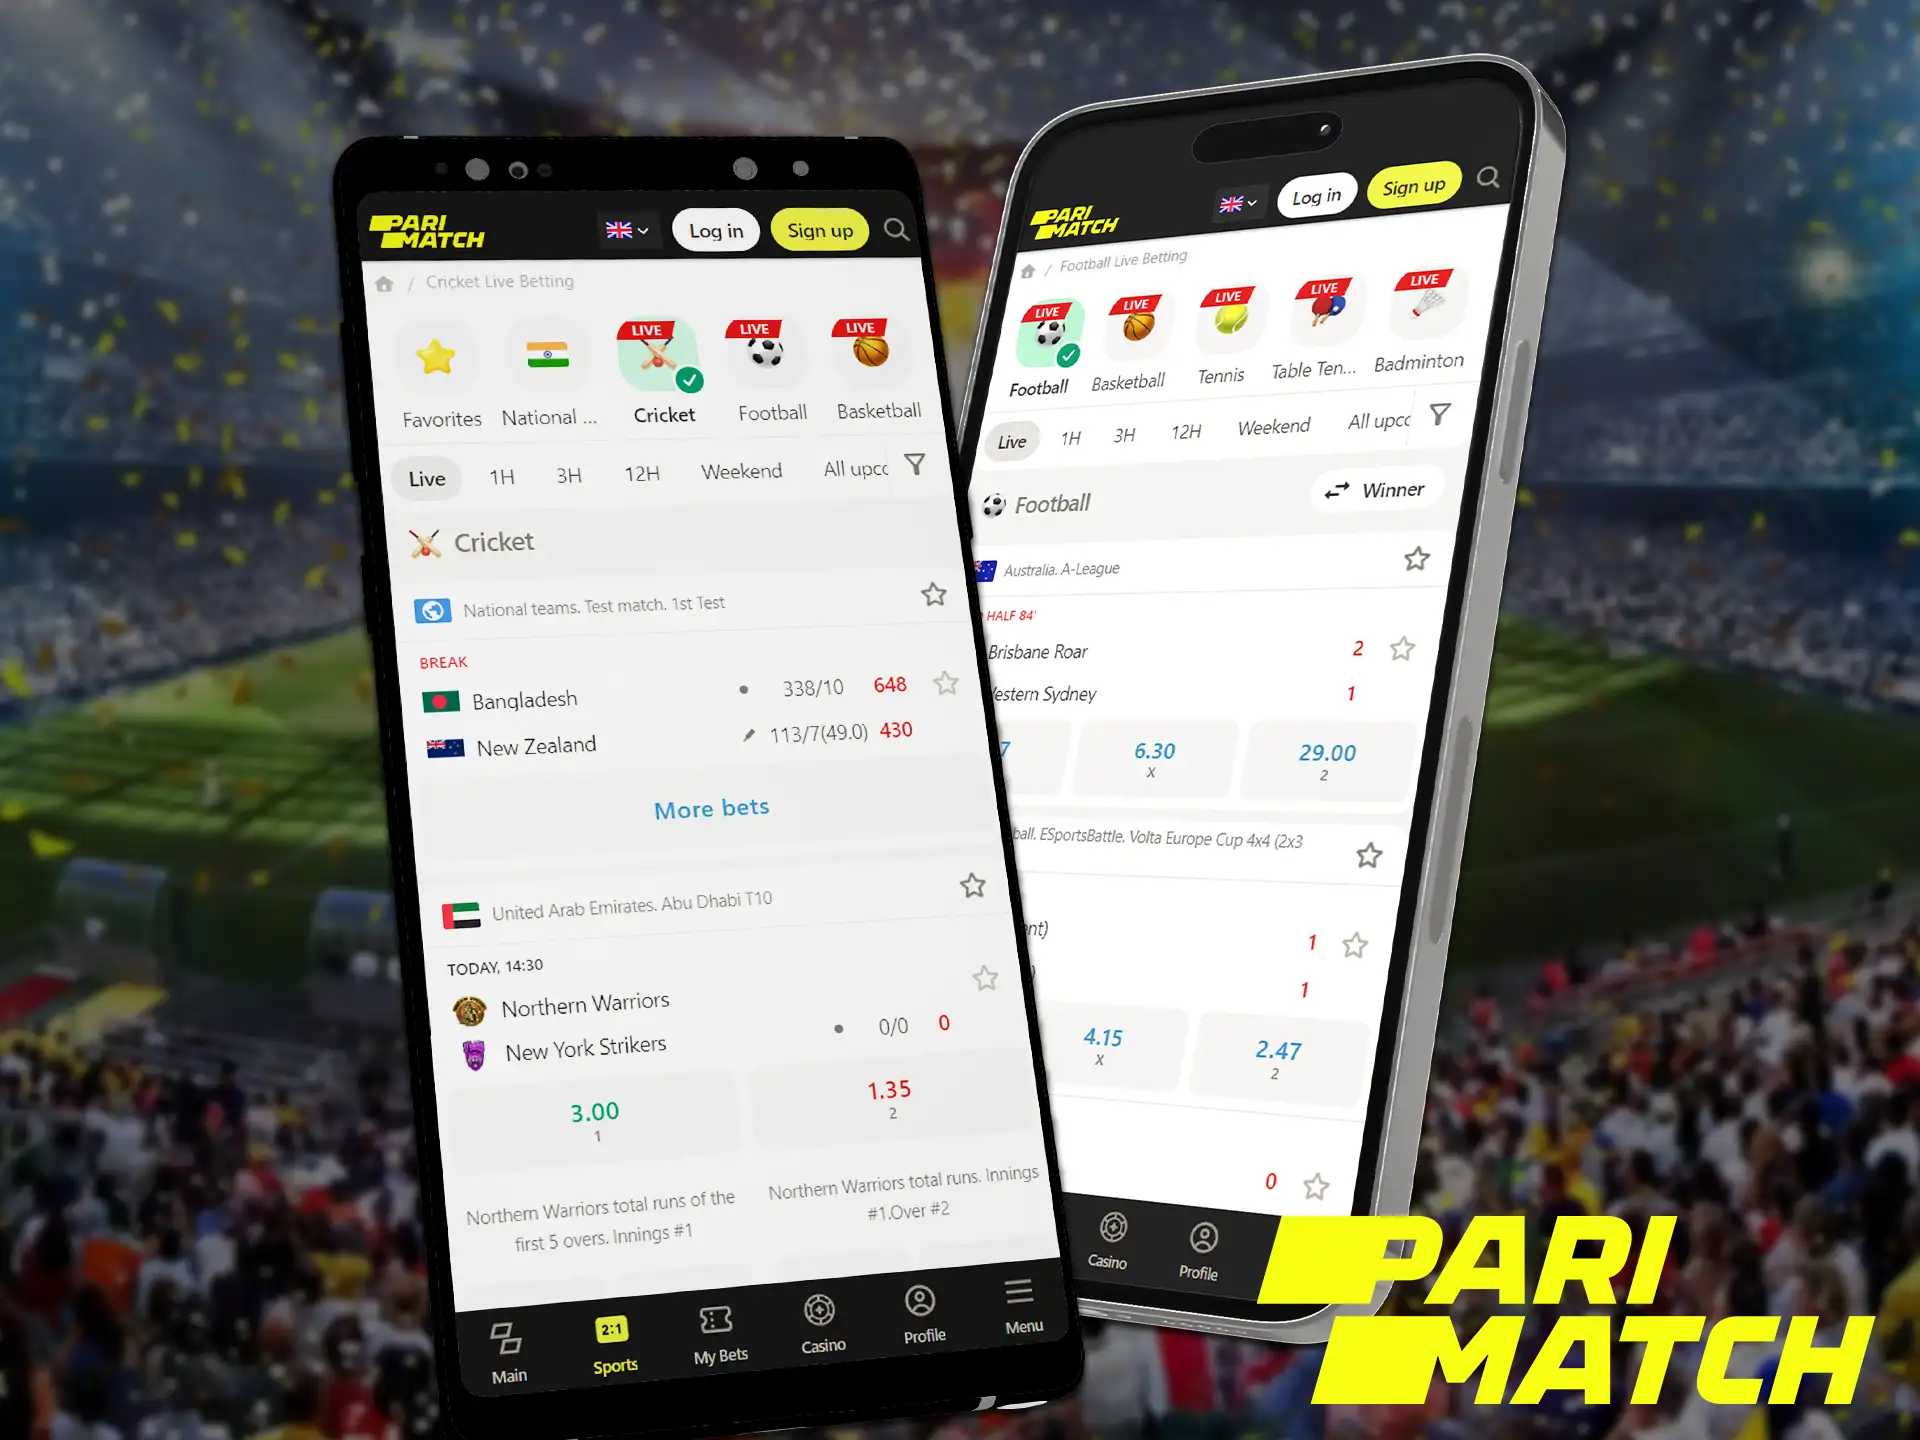 One of the best betting sites with a mobile app is Parimatch.